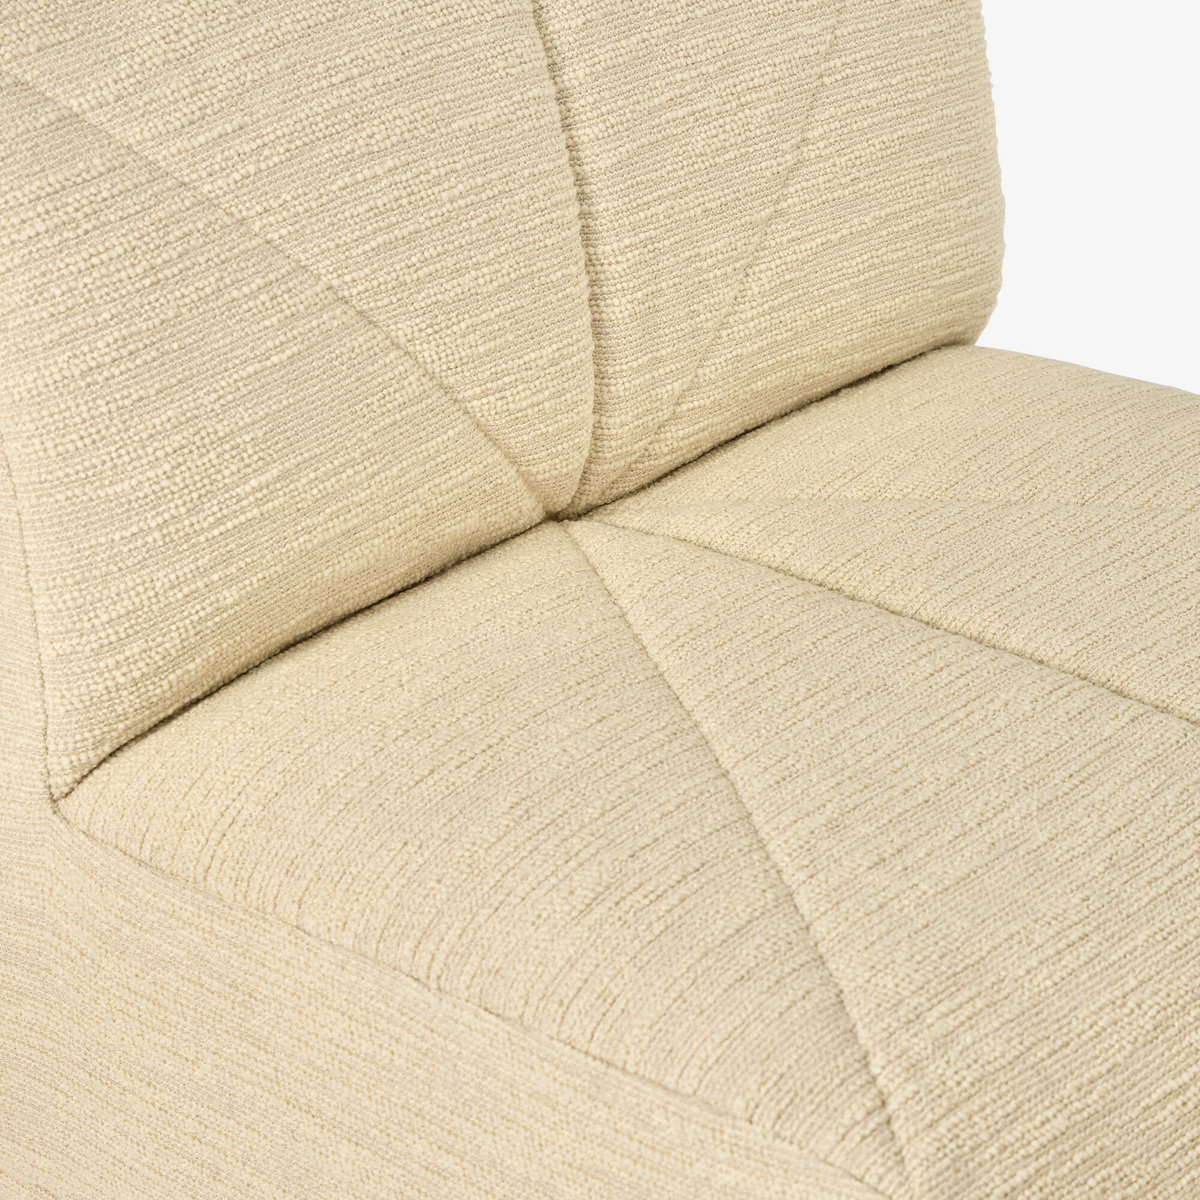 Chill Armchair, Off-White - Curl fabric - image 5